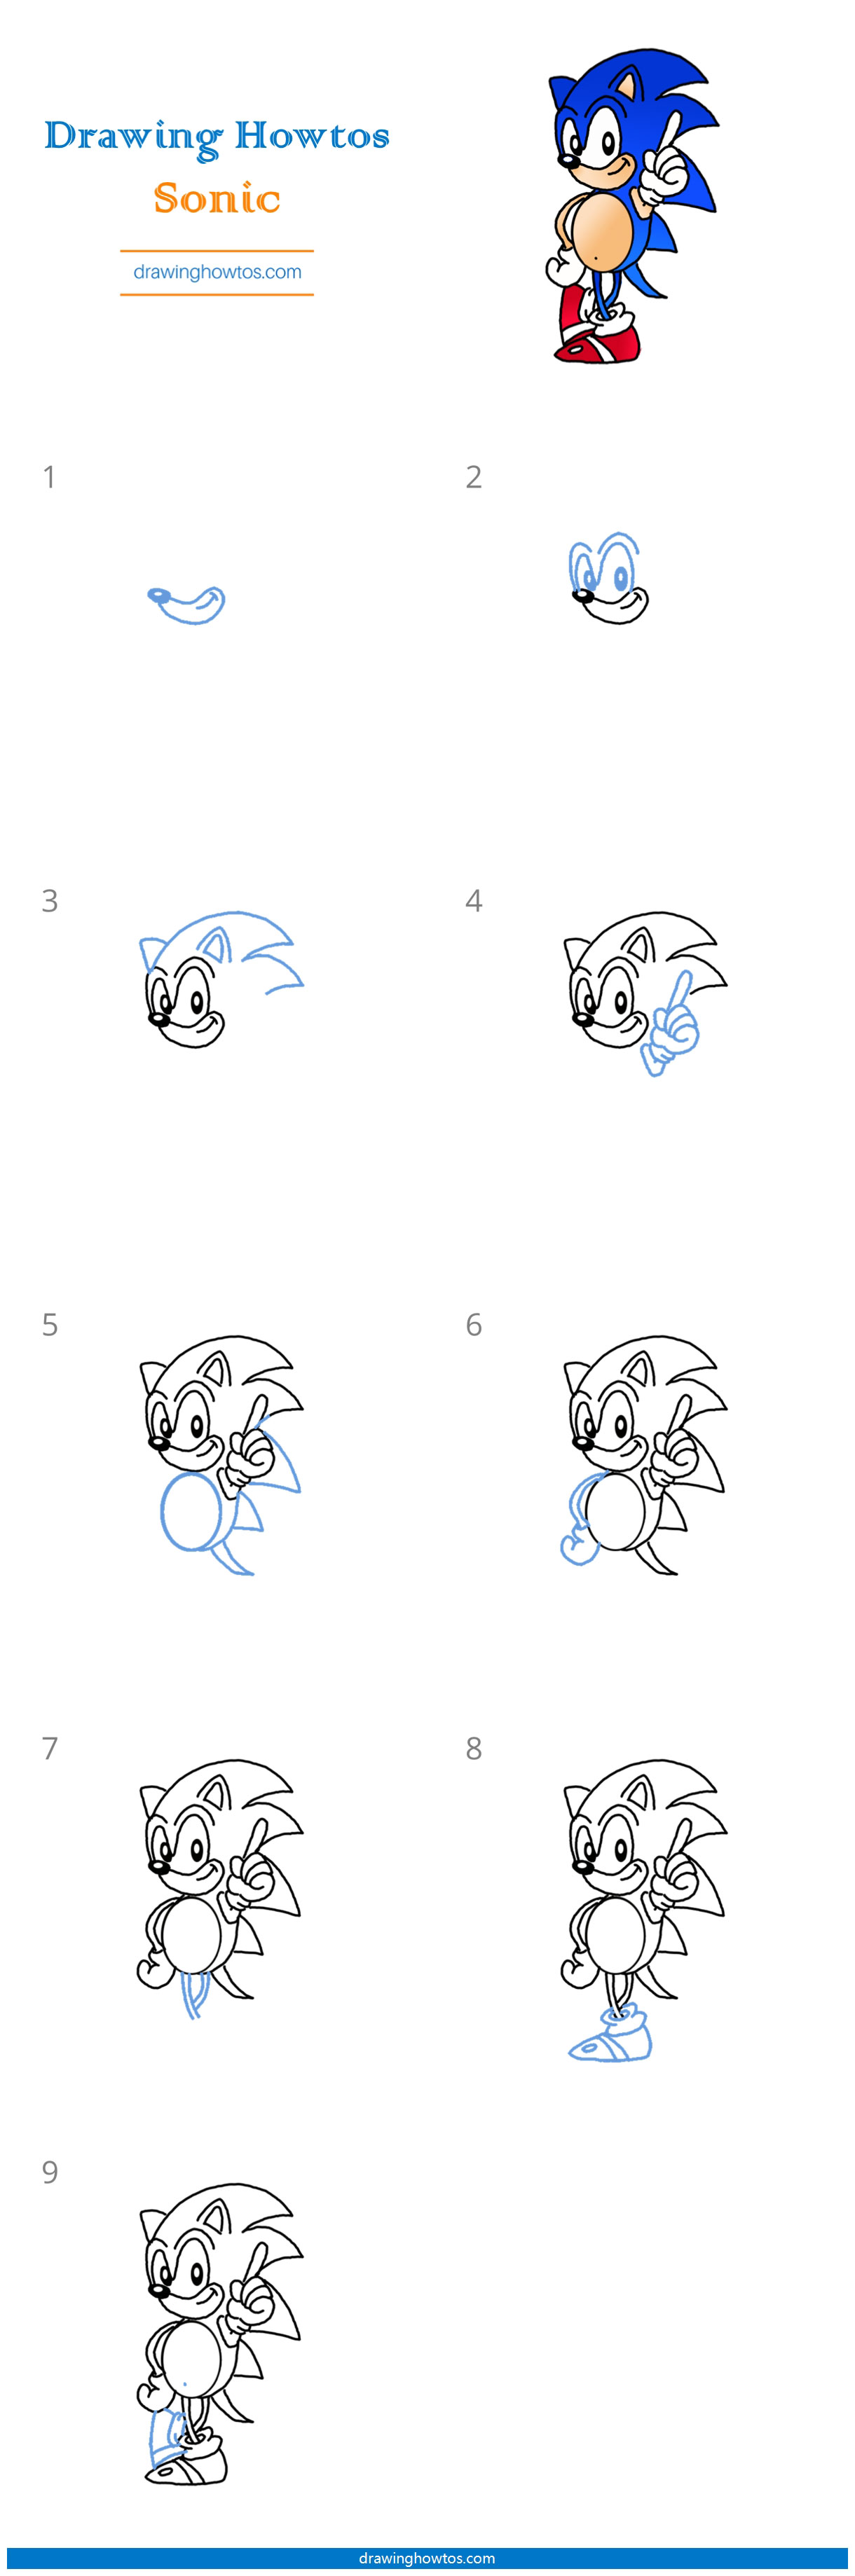 How to Draw Sonic the Hedgehog Step by Step